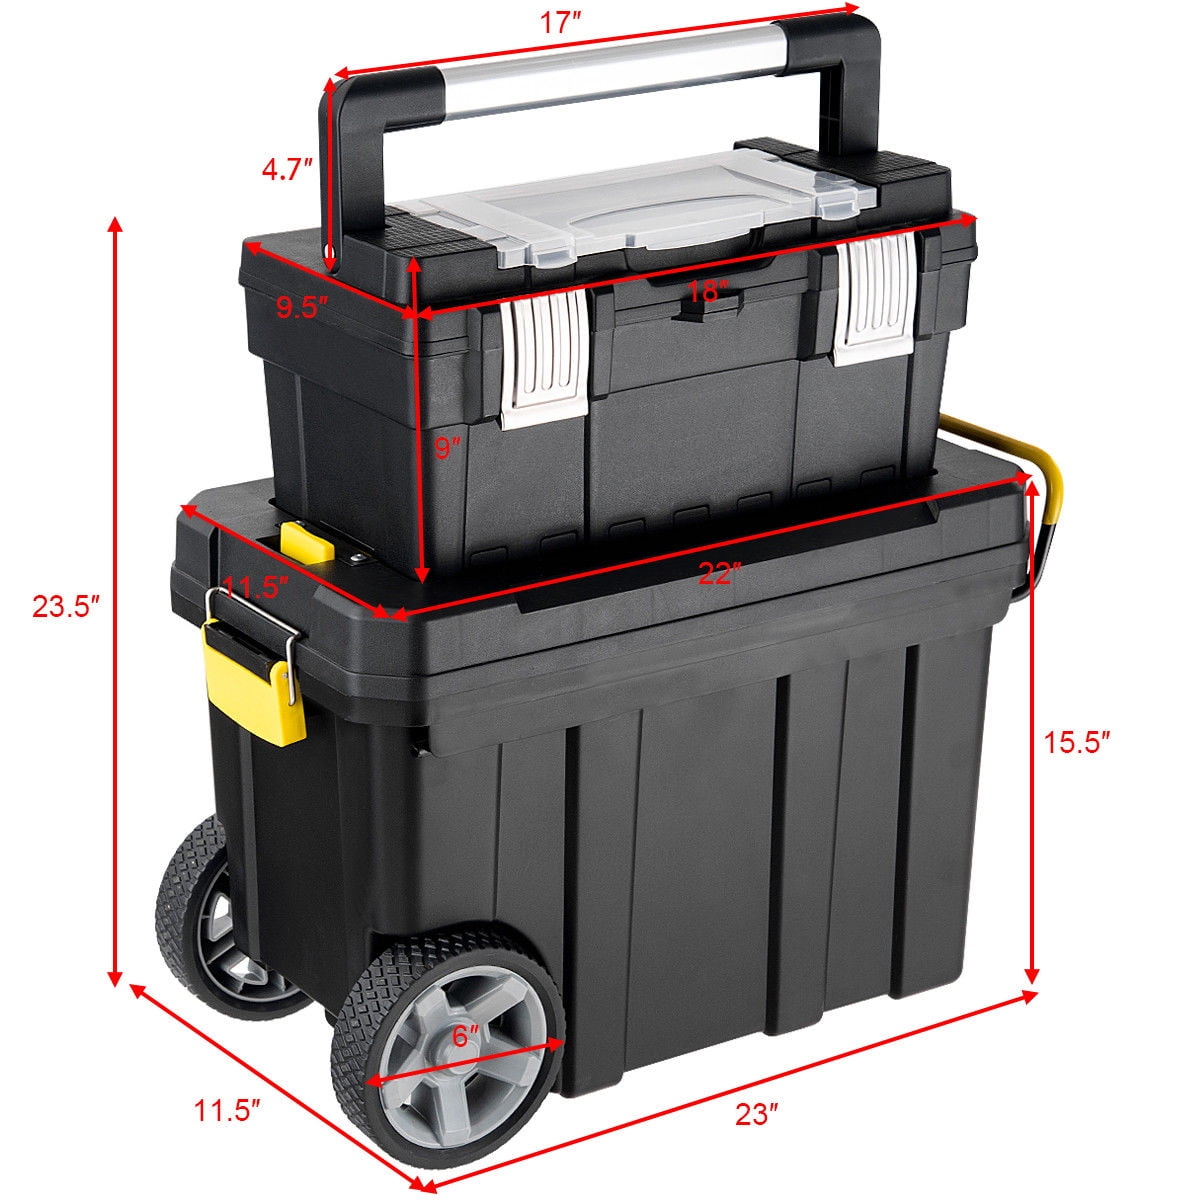 3-in-1 Detachable Tool Box Mobile Work Center 11 in 